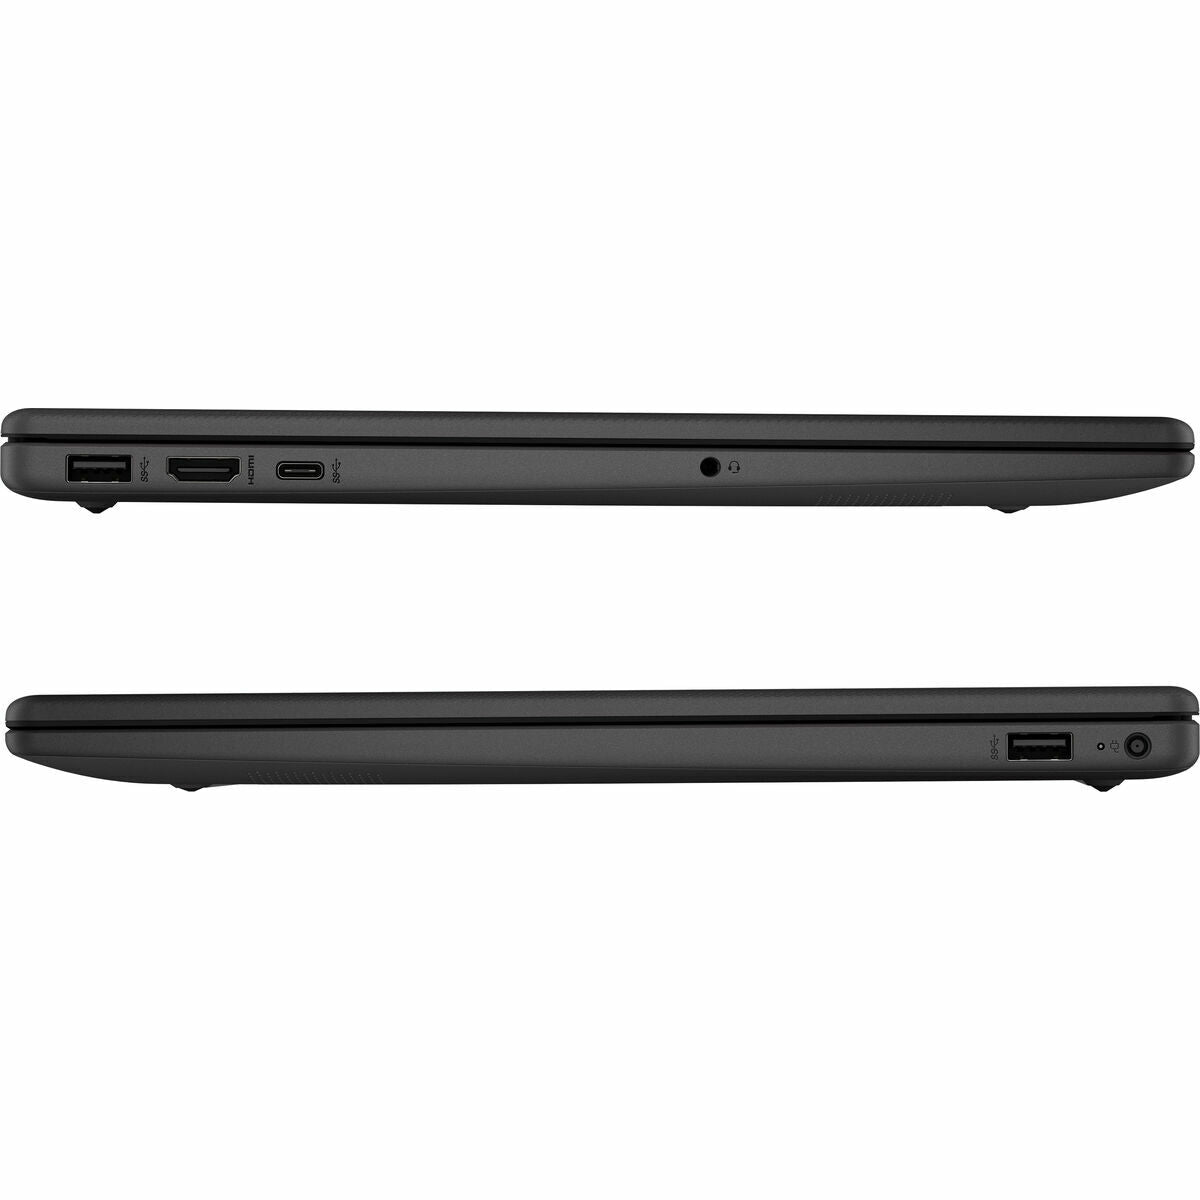 Laptop HP 725L1EA, HP, Computing, Accessories, laptop-hp-725l1ea, Brand_HP, category-reference-2609, category-reference-2803, category-reference-2828, category-reference-t-19685, category-reference-t-19908, category-reference-t-21349, Condition_NEW, furniture, networks/wiring, organisation, Price_600 - 700, Teleworking, RiotNook